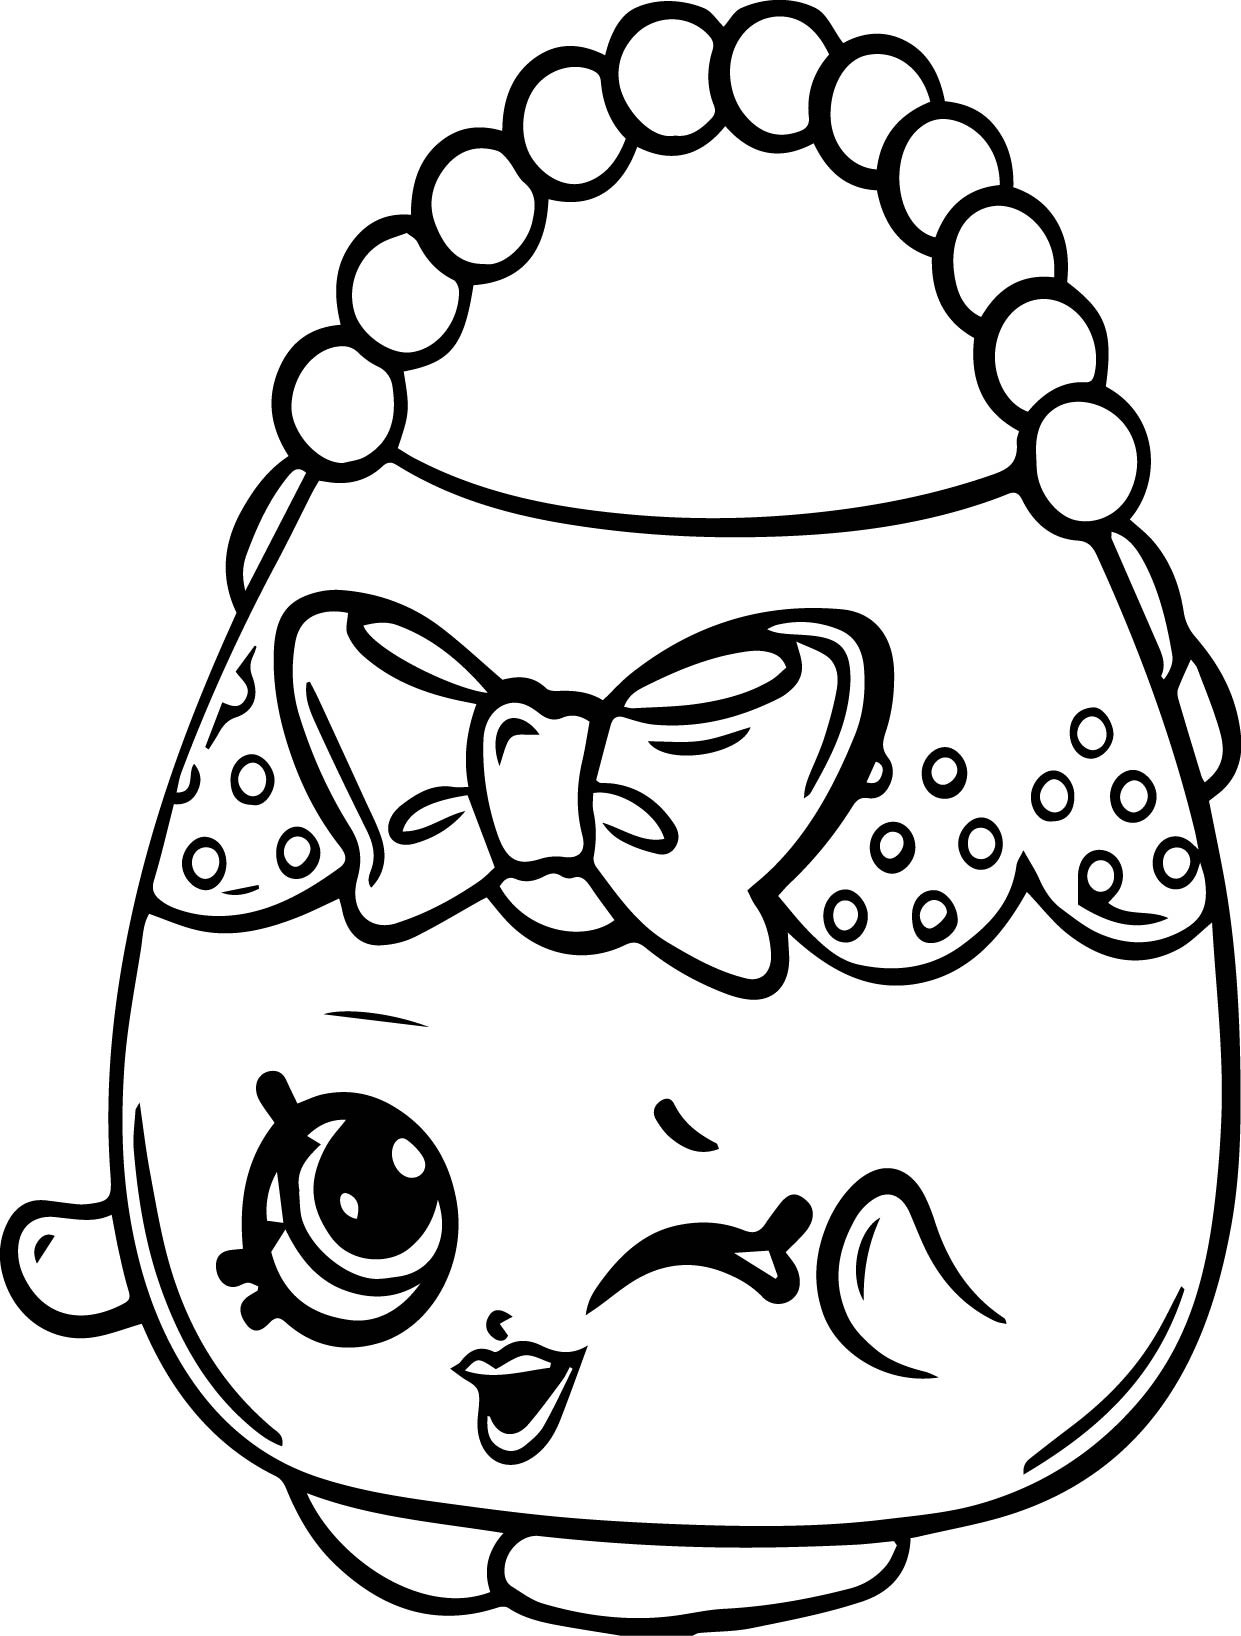 Free Shopkin Coloring Pages at GetDrawings Free download